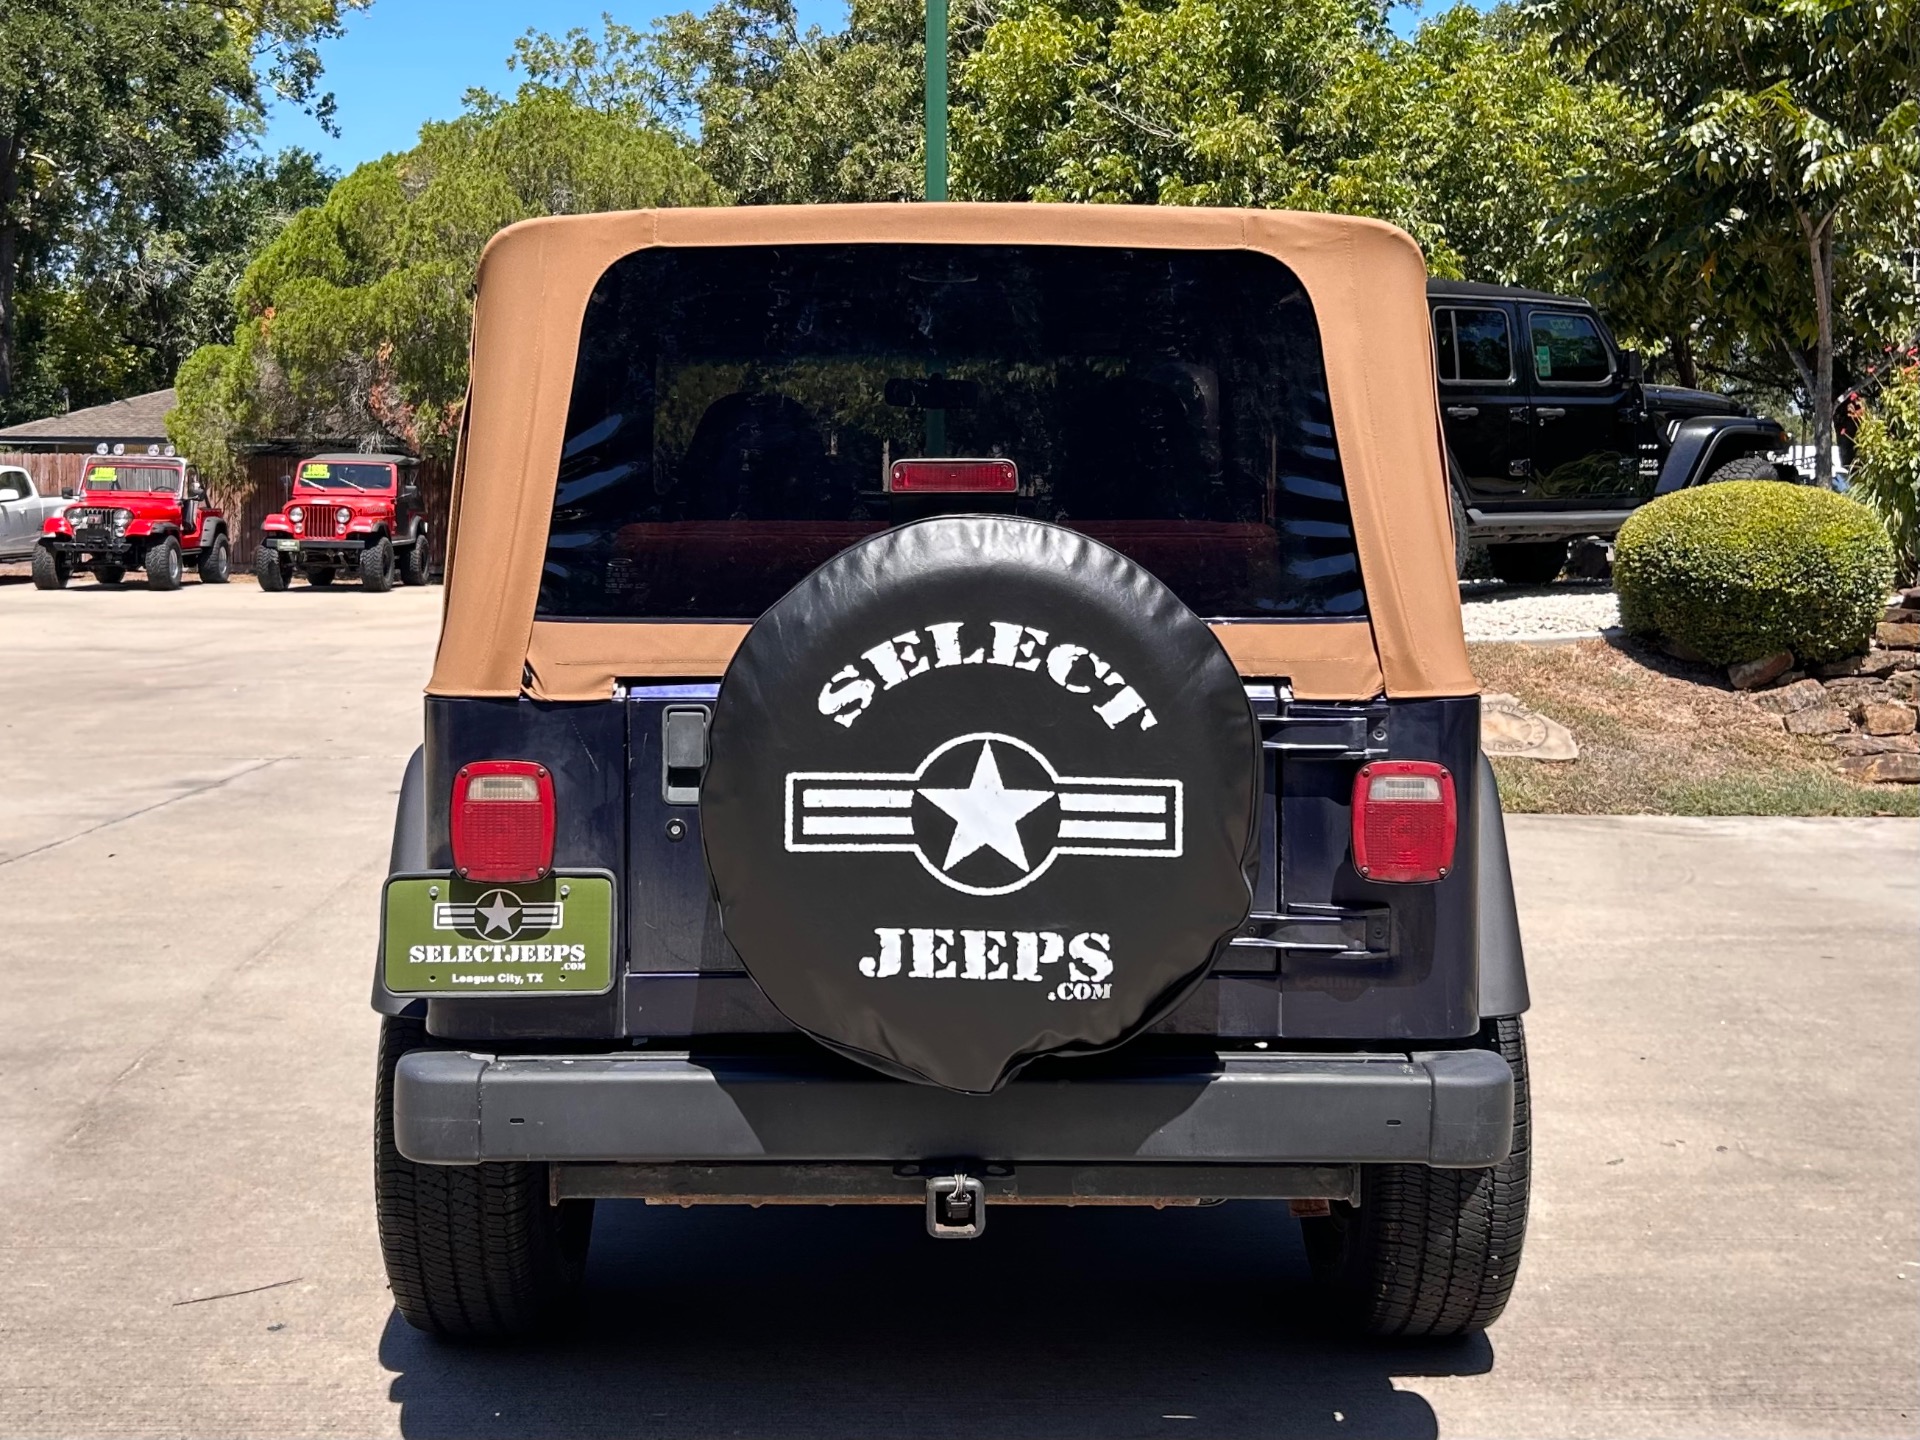 Used 1998 Jeep Wrangler SE For Sale ($10,995) | Select Jeeps Inc. Stock  #718648